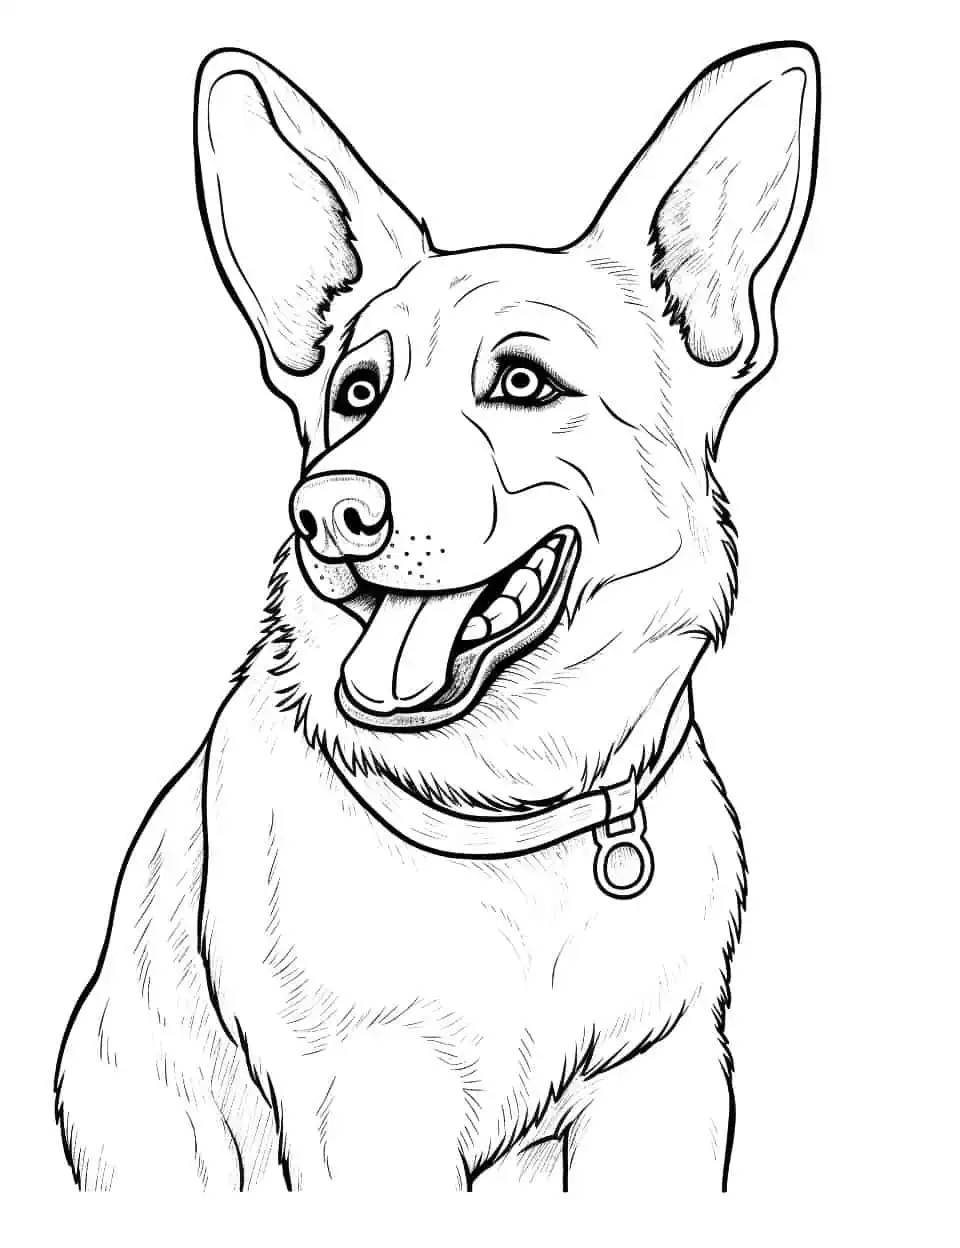 Realistic German Shepherd Dog Coloring Page - A detailed, realistic German Shepherd ready for coloring.